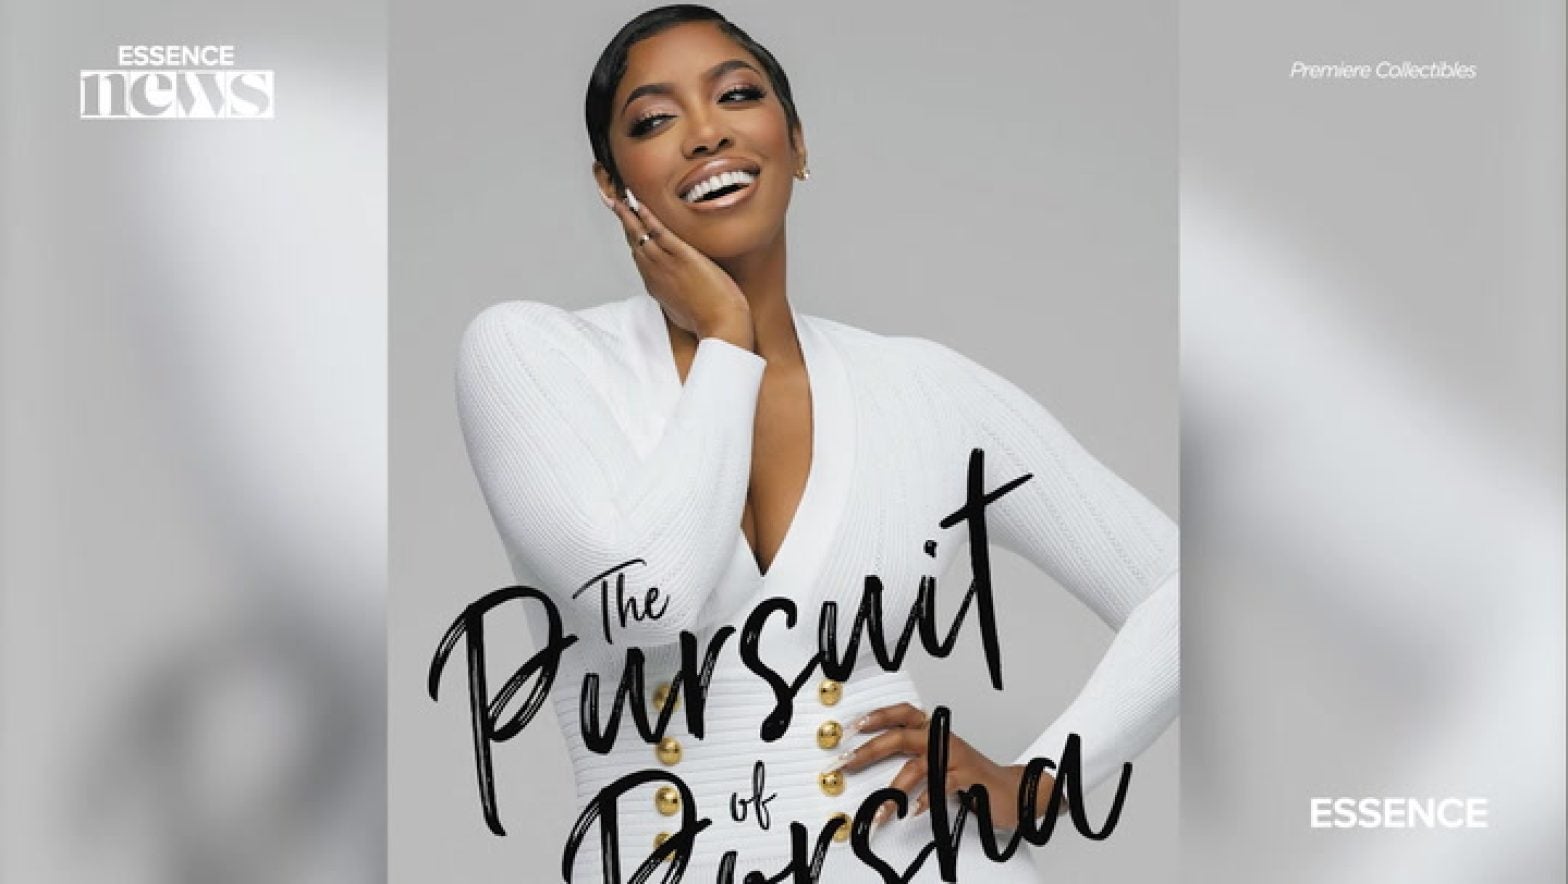 Porsha Williams On Walking In Her Purpose And Her Book, ‘The Pursuit of Porsha’